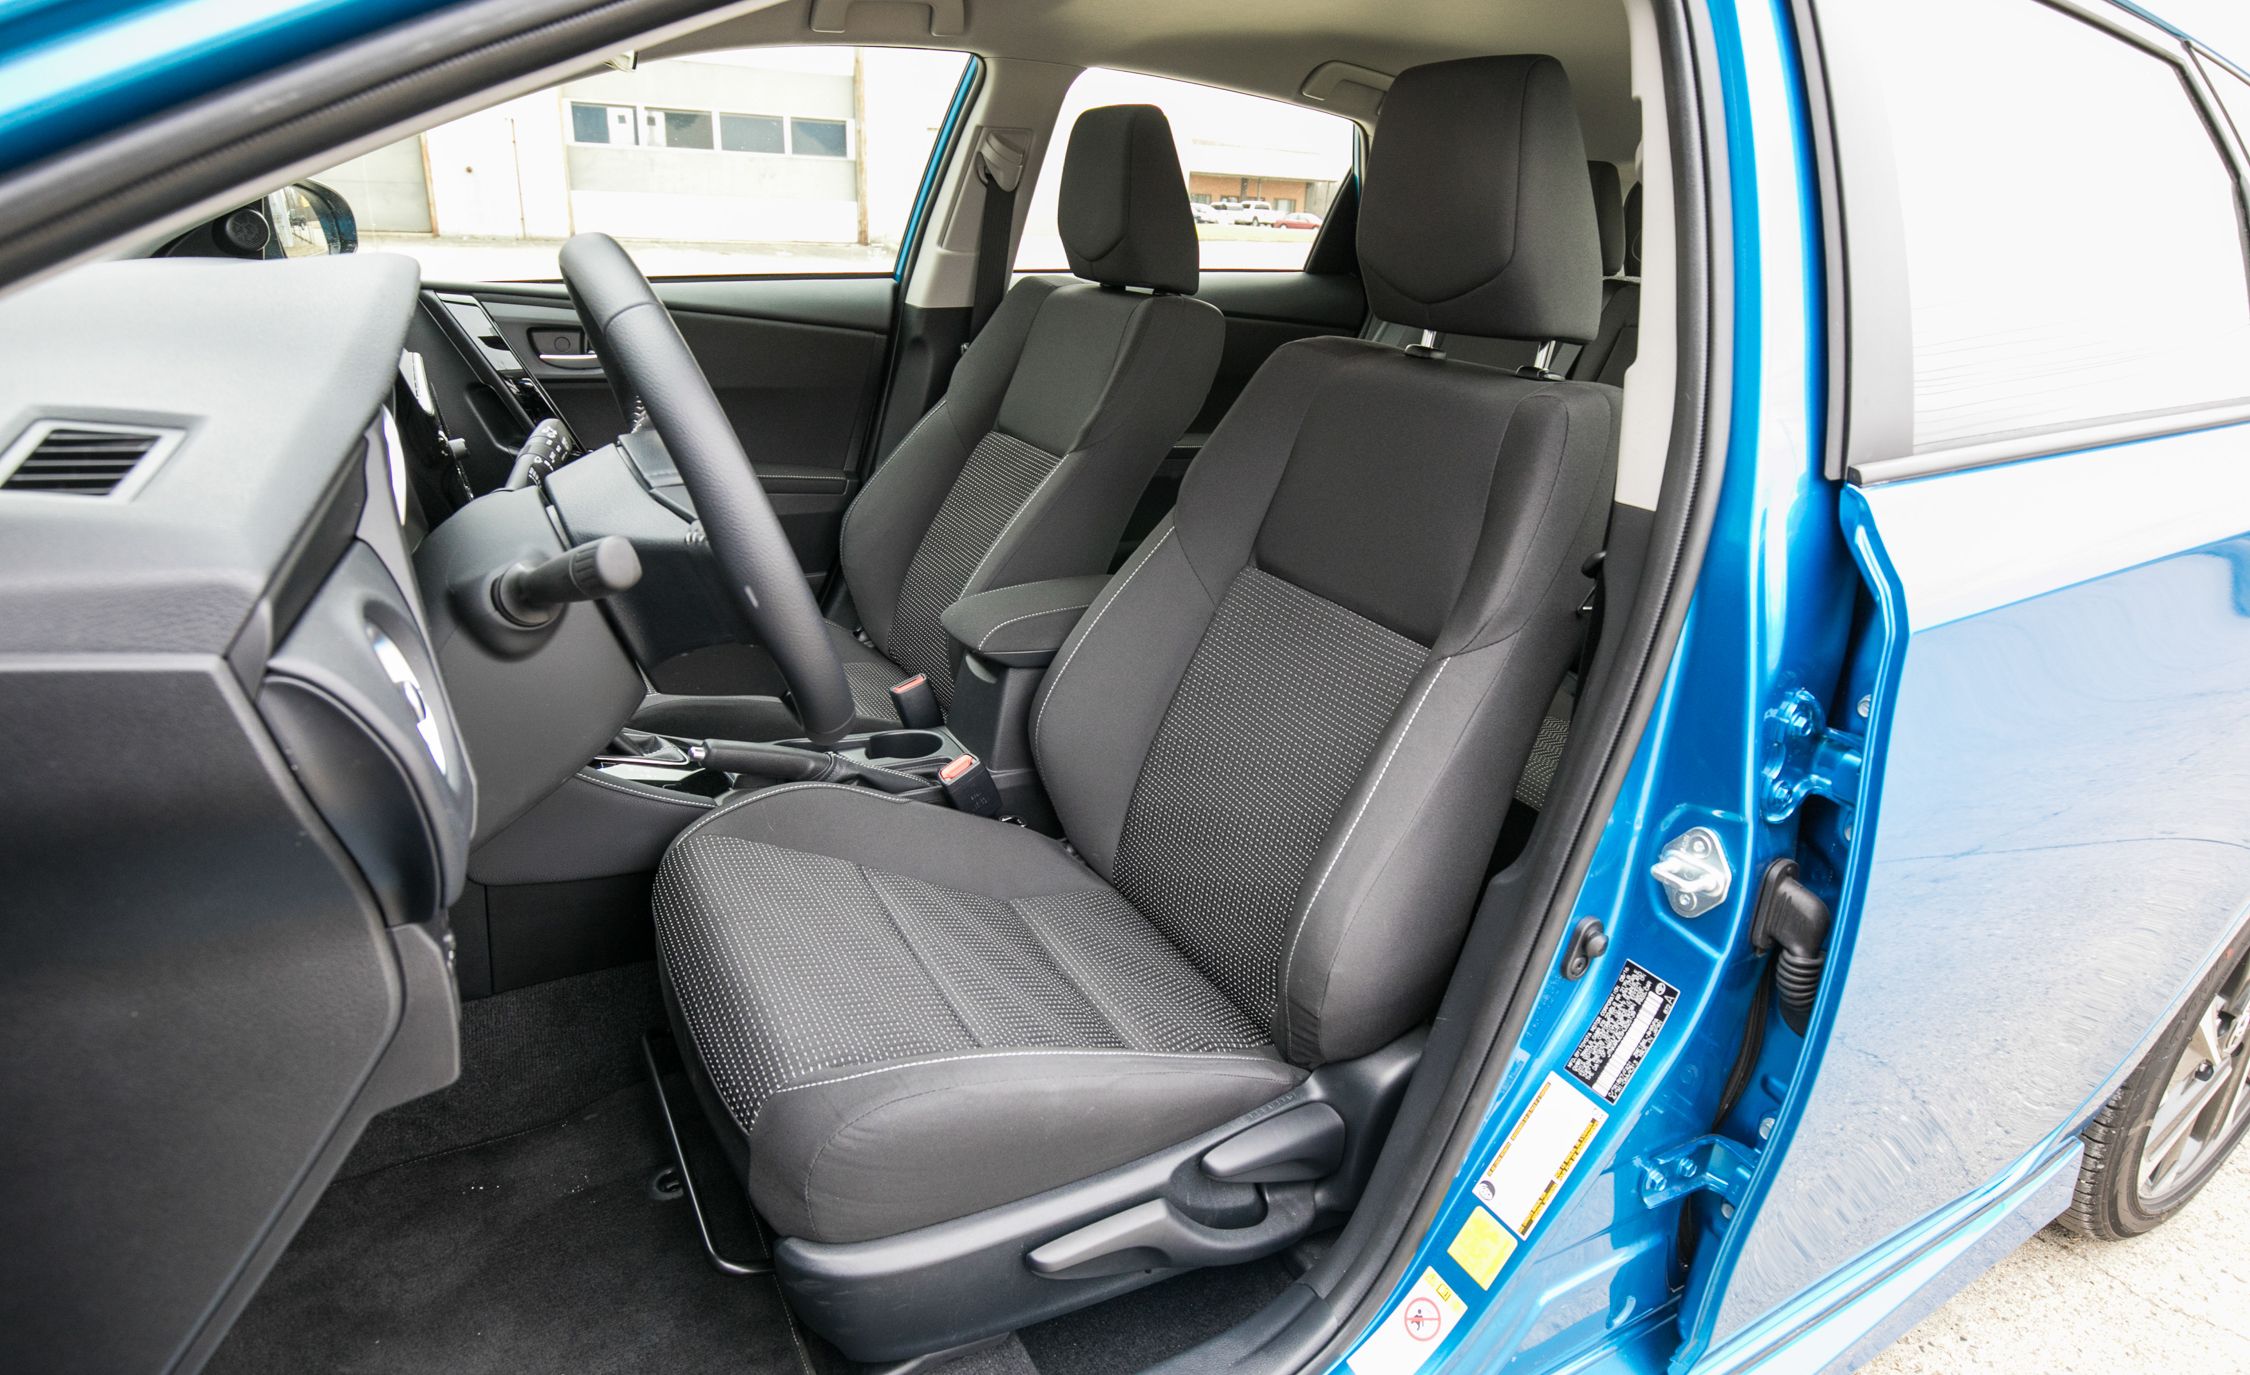 2017 Toyota Corolla IM Hatchback Interior Seats Front (View 45 of 52)